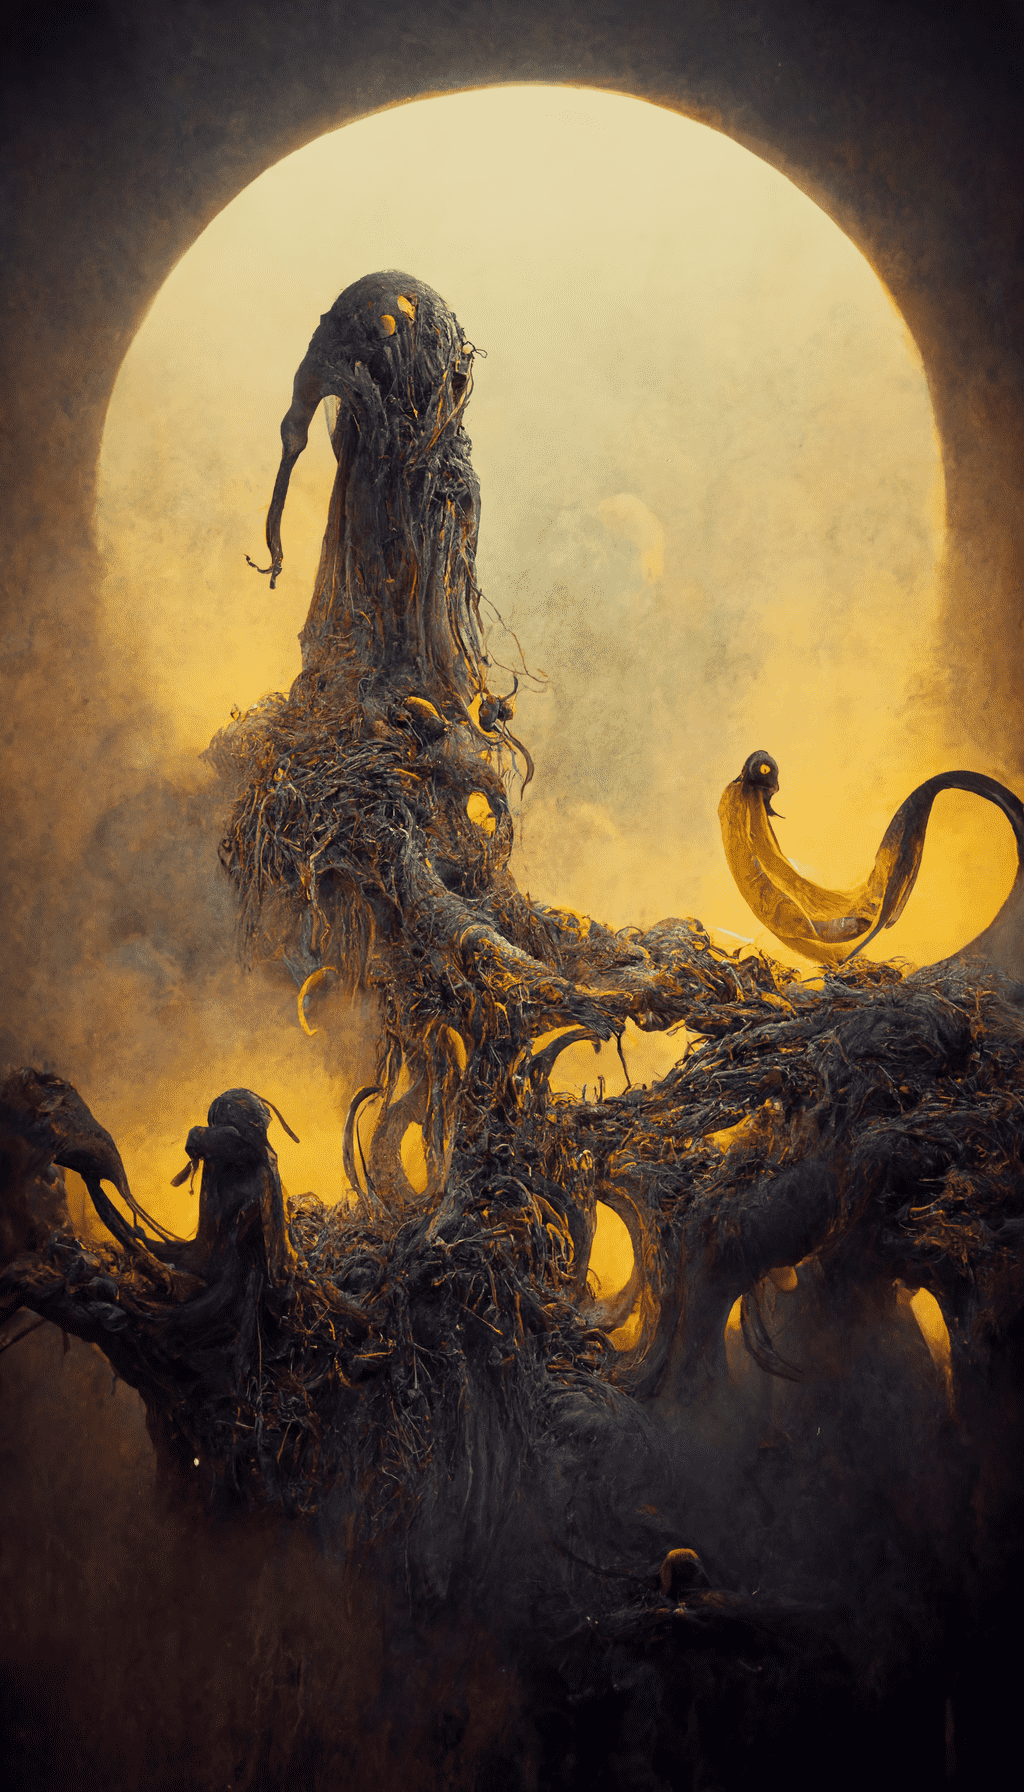 Remizca_in_the_style_of_peter_mohrbacher_and_greg_rutkowski_an__5bf8727f-8607-4e16-8e13-6170a0...png